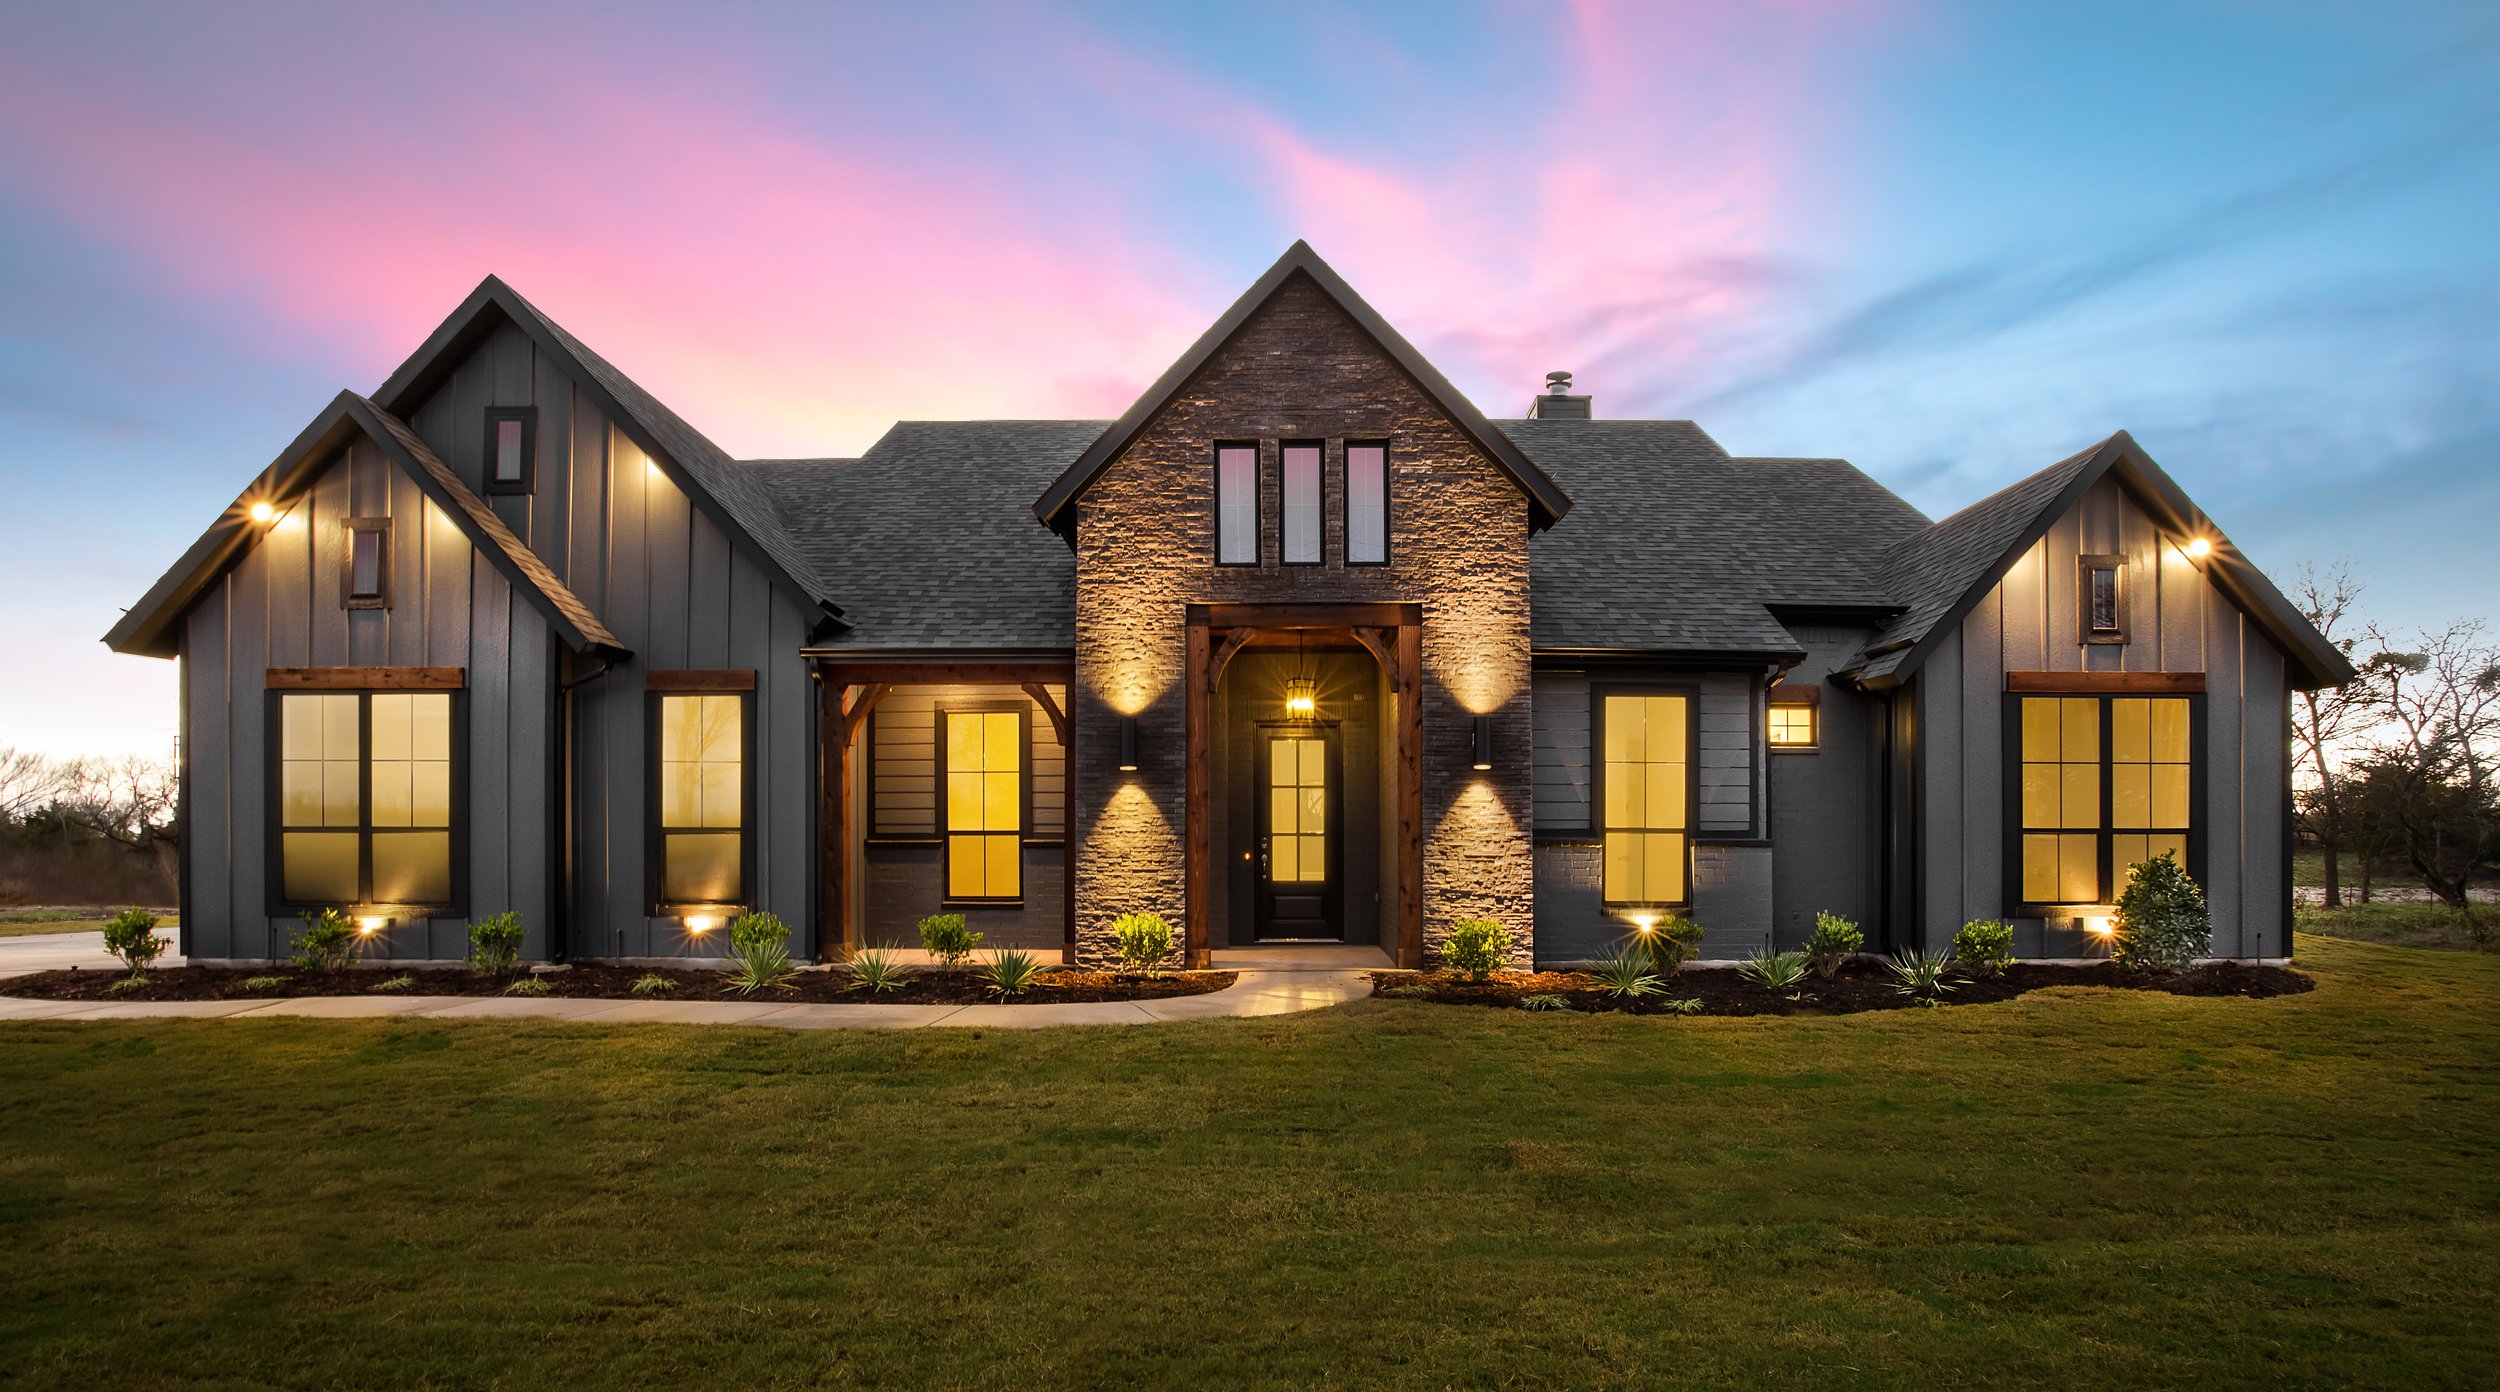 Essential Tips for Choosing Your Dream Home with a Premier Homebuilder